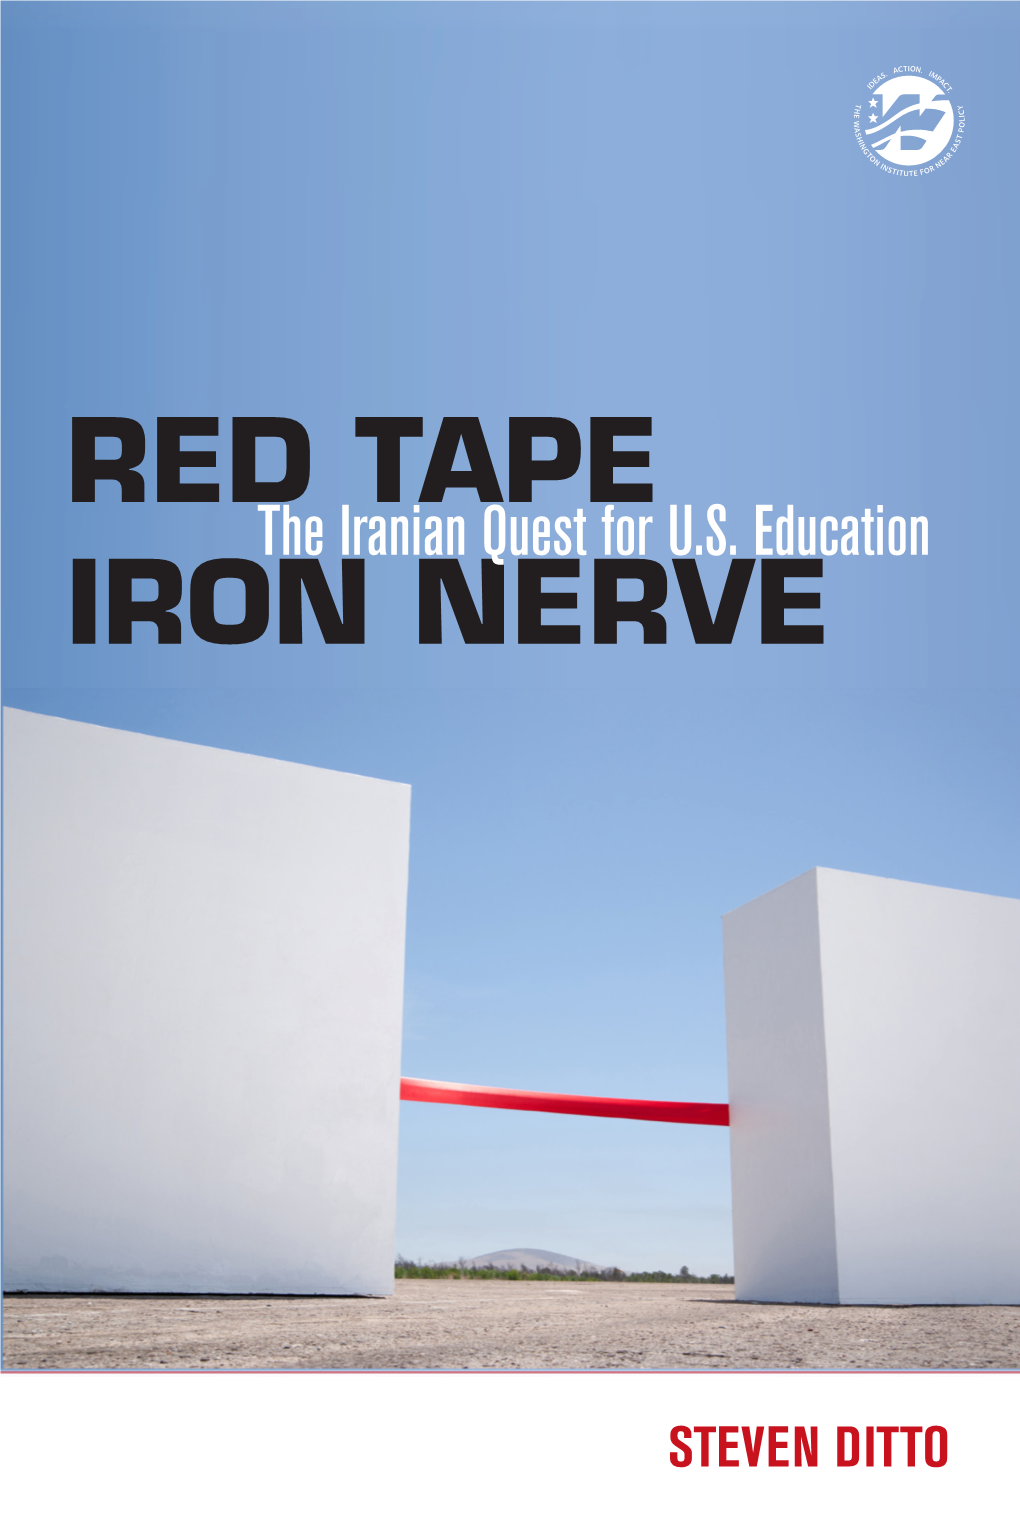 Red Tape Iron Nerve